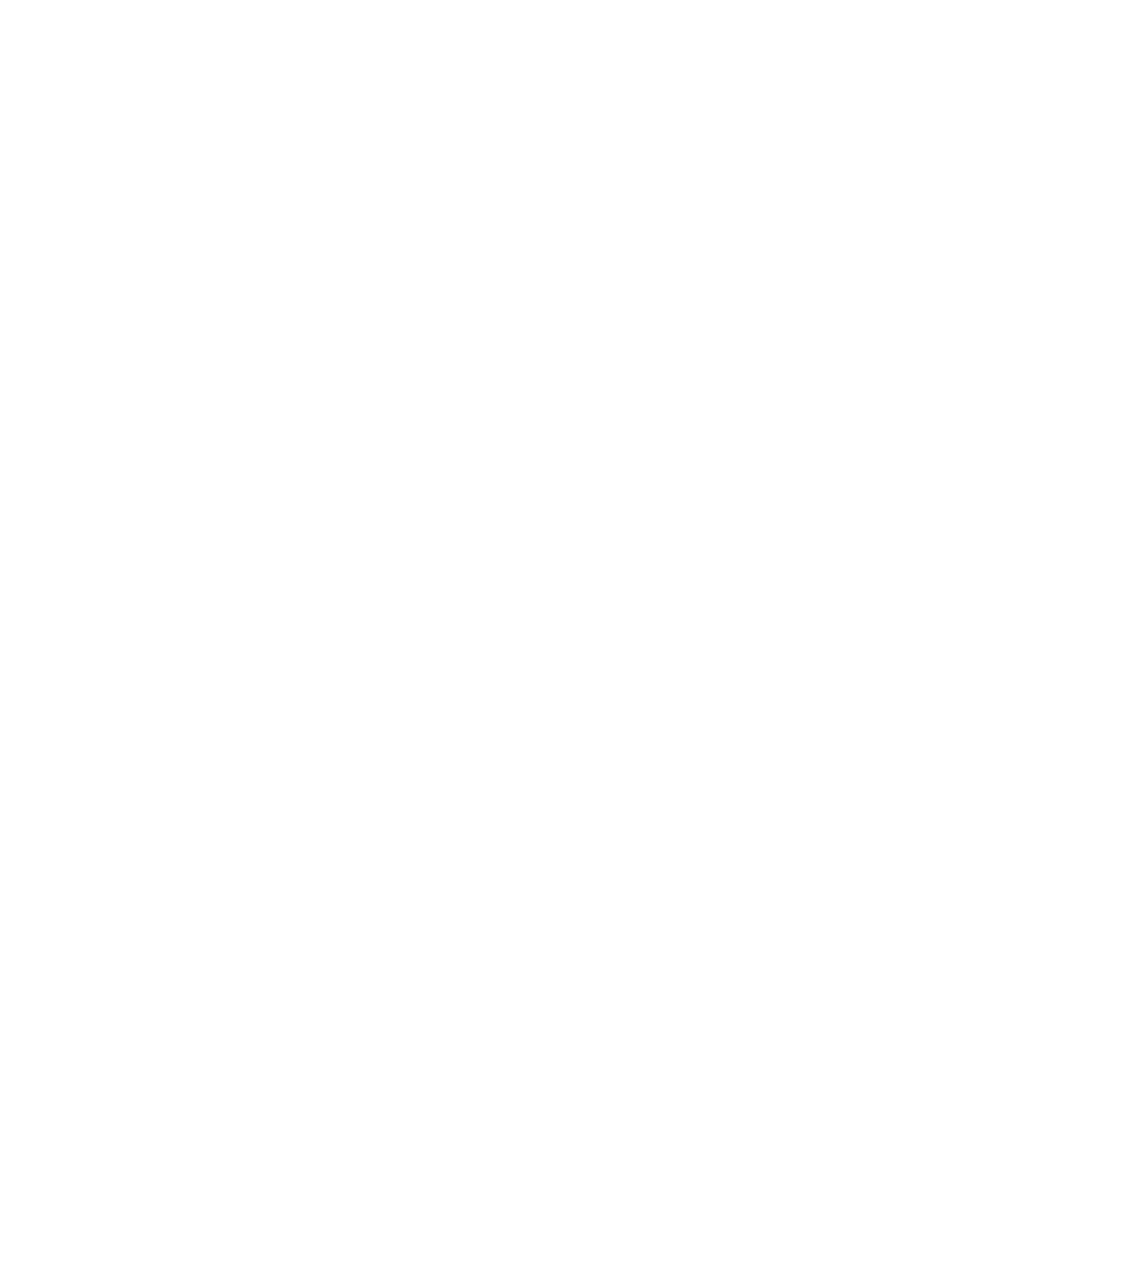 1. ISO 5833, Implants for Surgery – Acrylic Resin Cements (2002). 2. Heidelberg University: Evaluation of Refobacin® ...